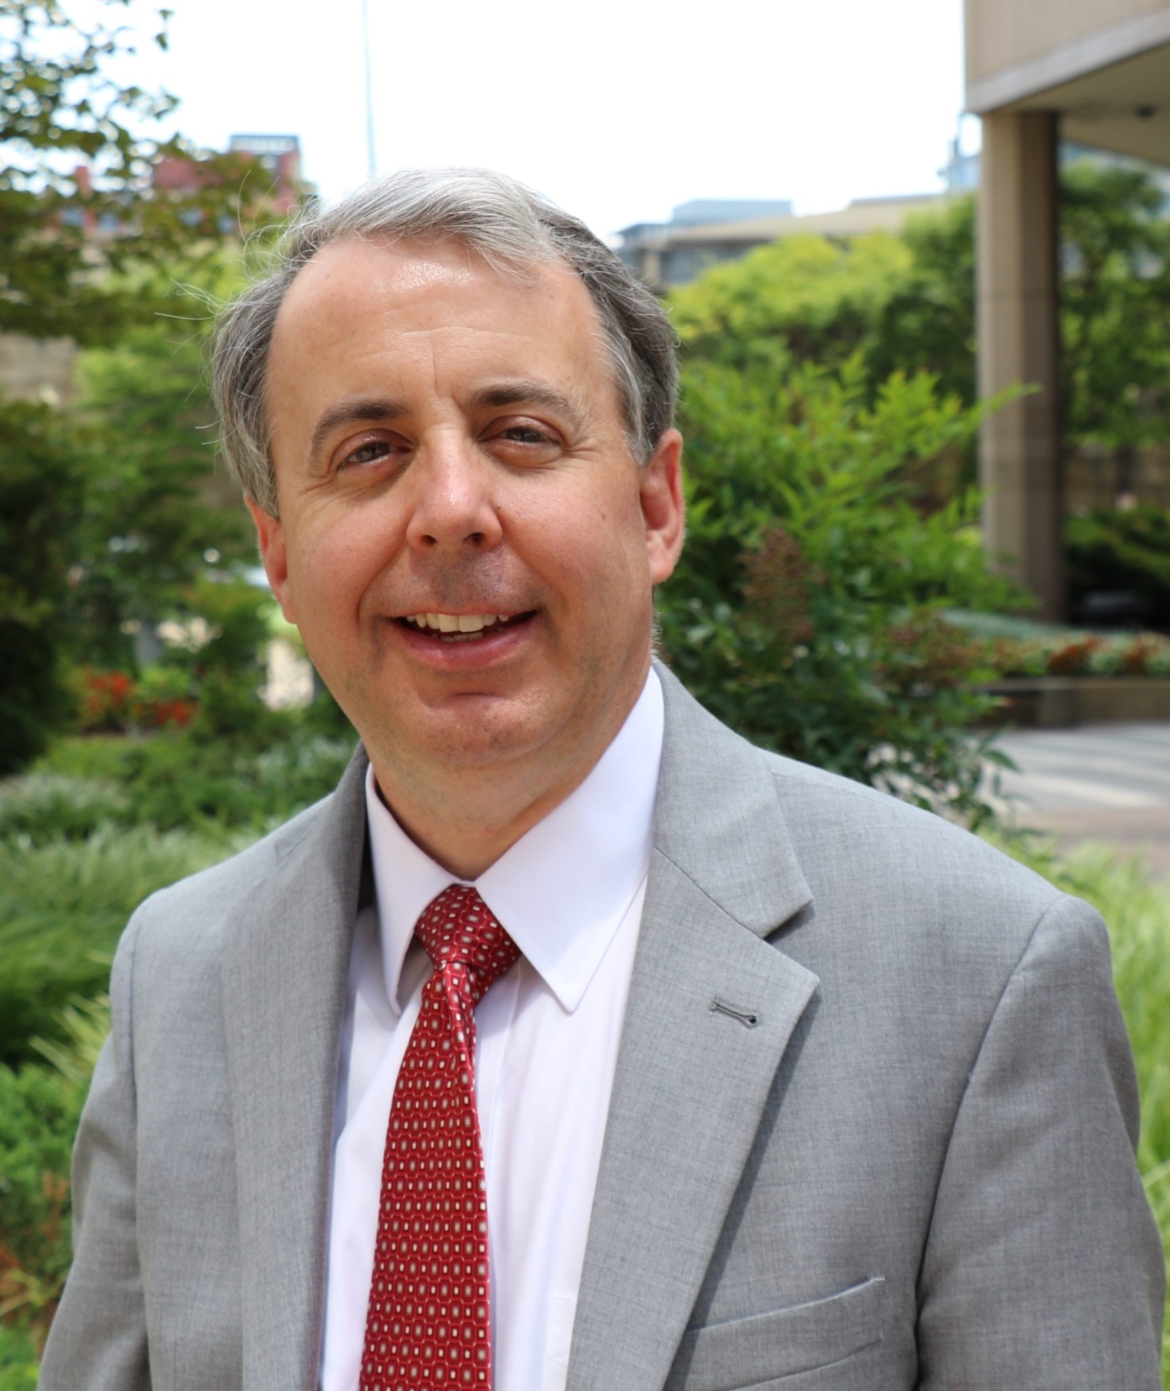 Portrait of David Hutt. He is a white man with silver and grey hair wearing a light grey jacket, white collared shirt and red tie. David is smiling at the camera, in front of a background of greenery.